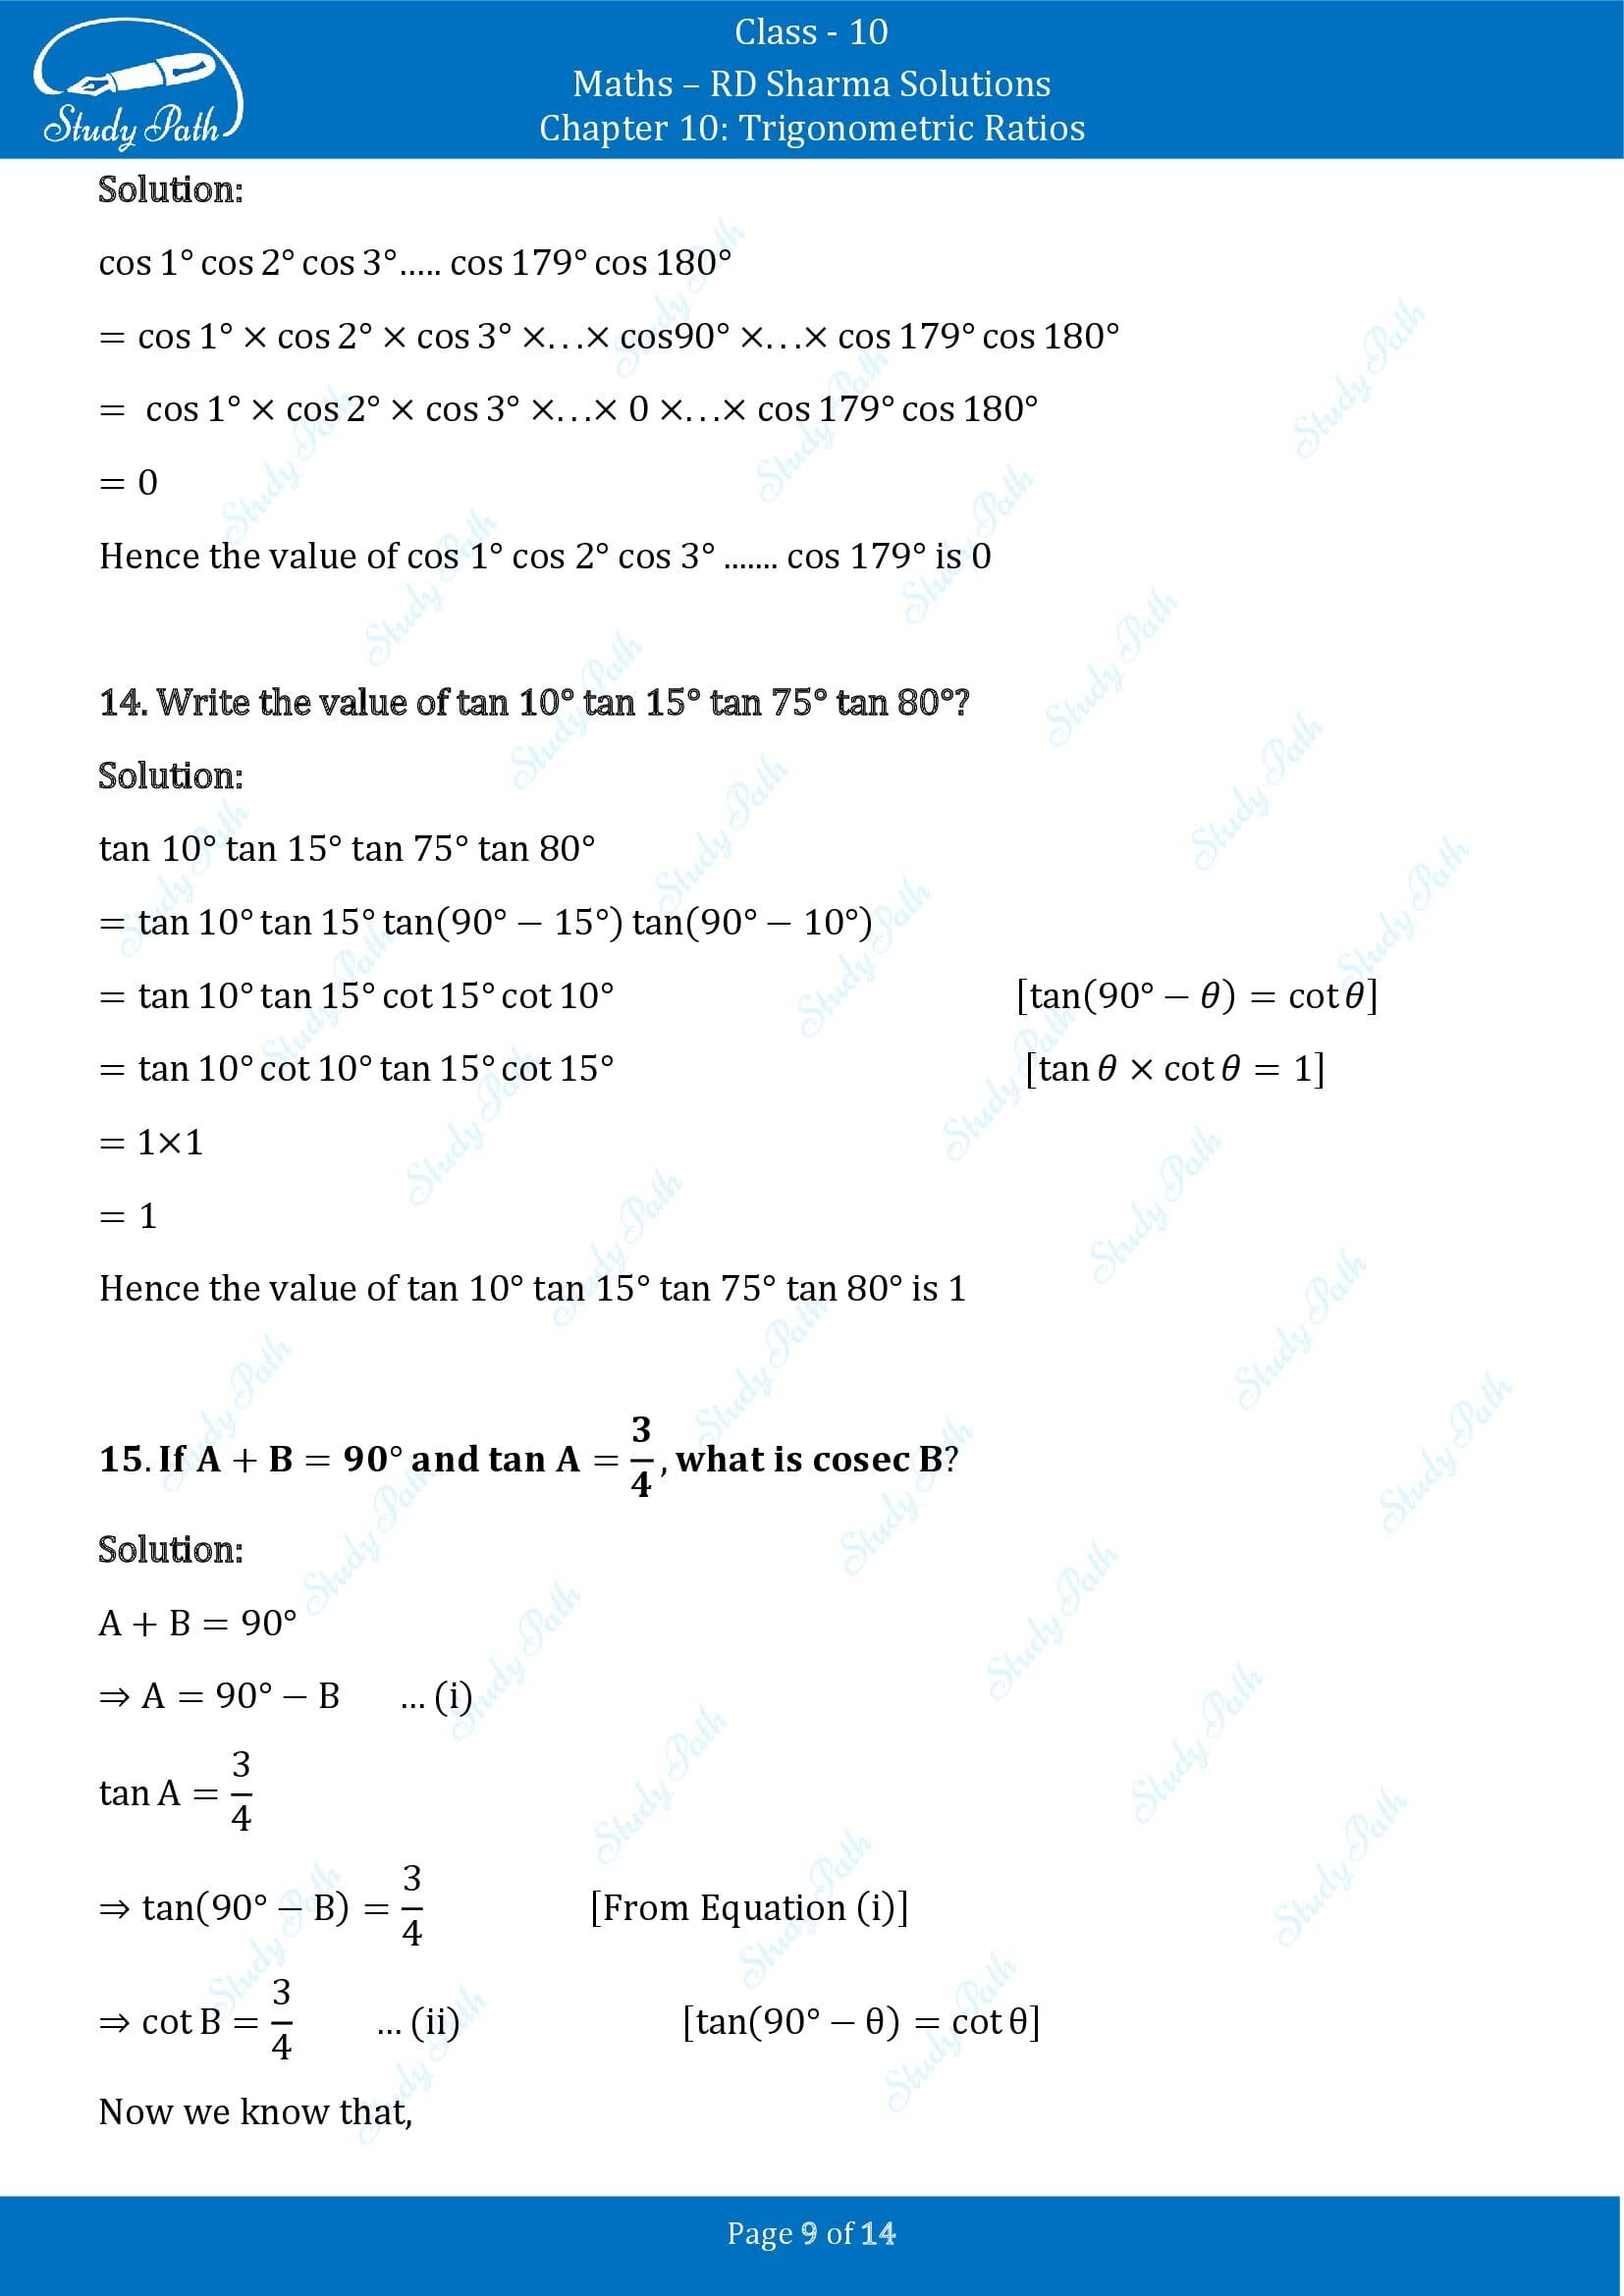 RD Sharma Solutions Class 10 Chapter 10 Trigonometric Ratios Very Short Answer Type Questions VSAQs 00009